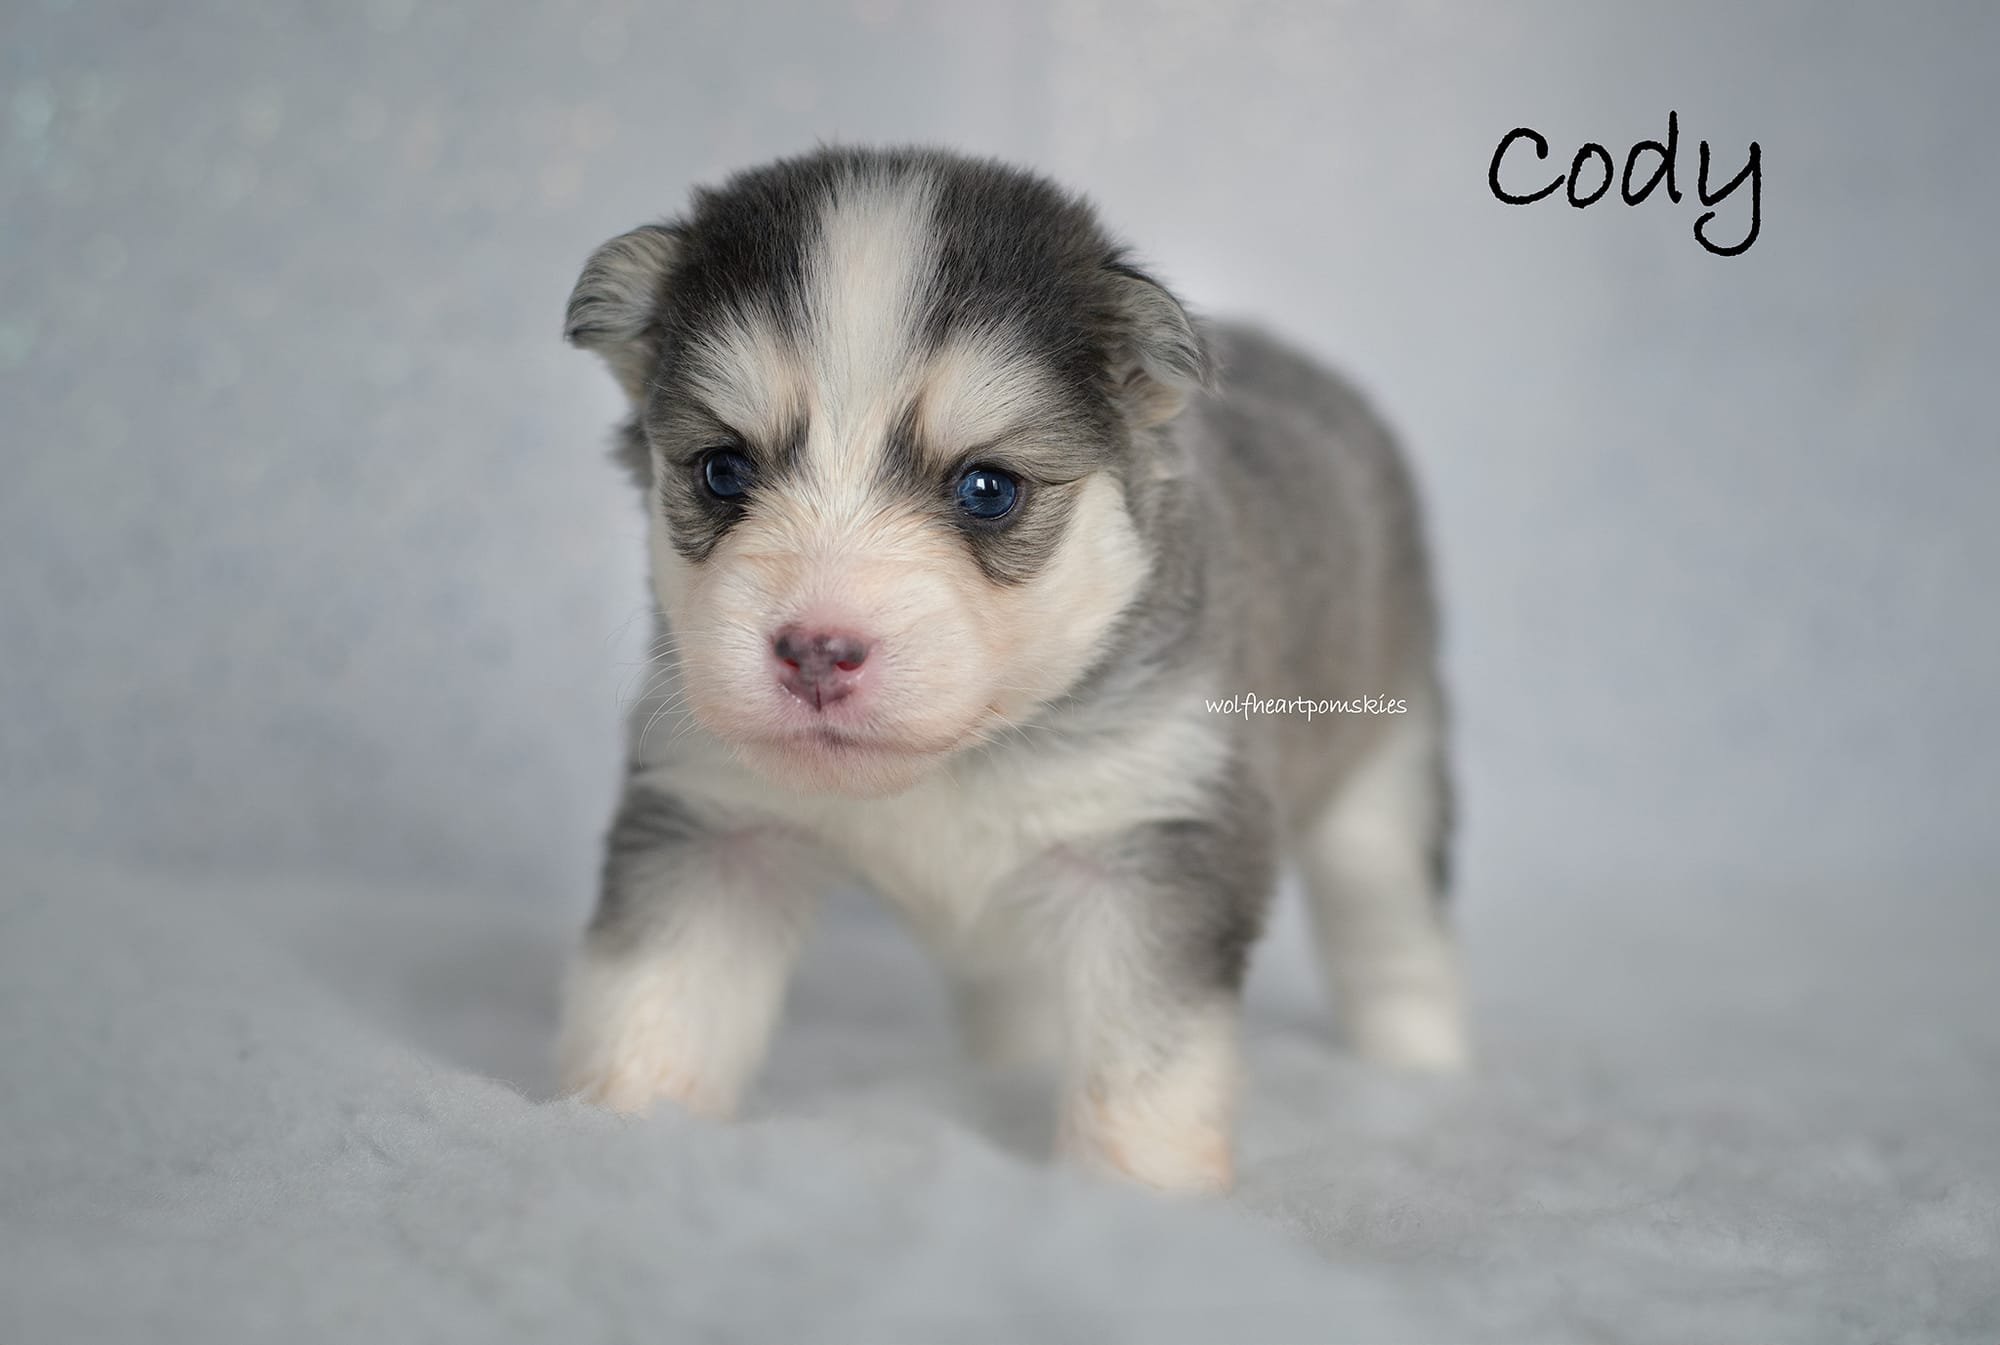 Cody, available to reserve